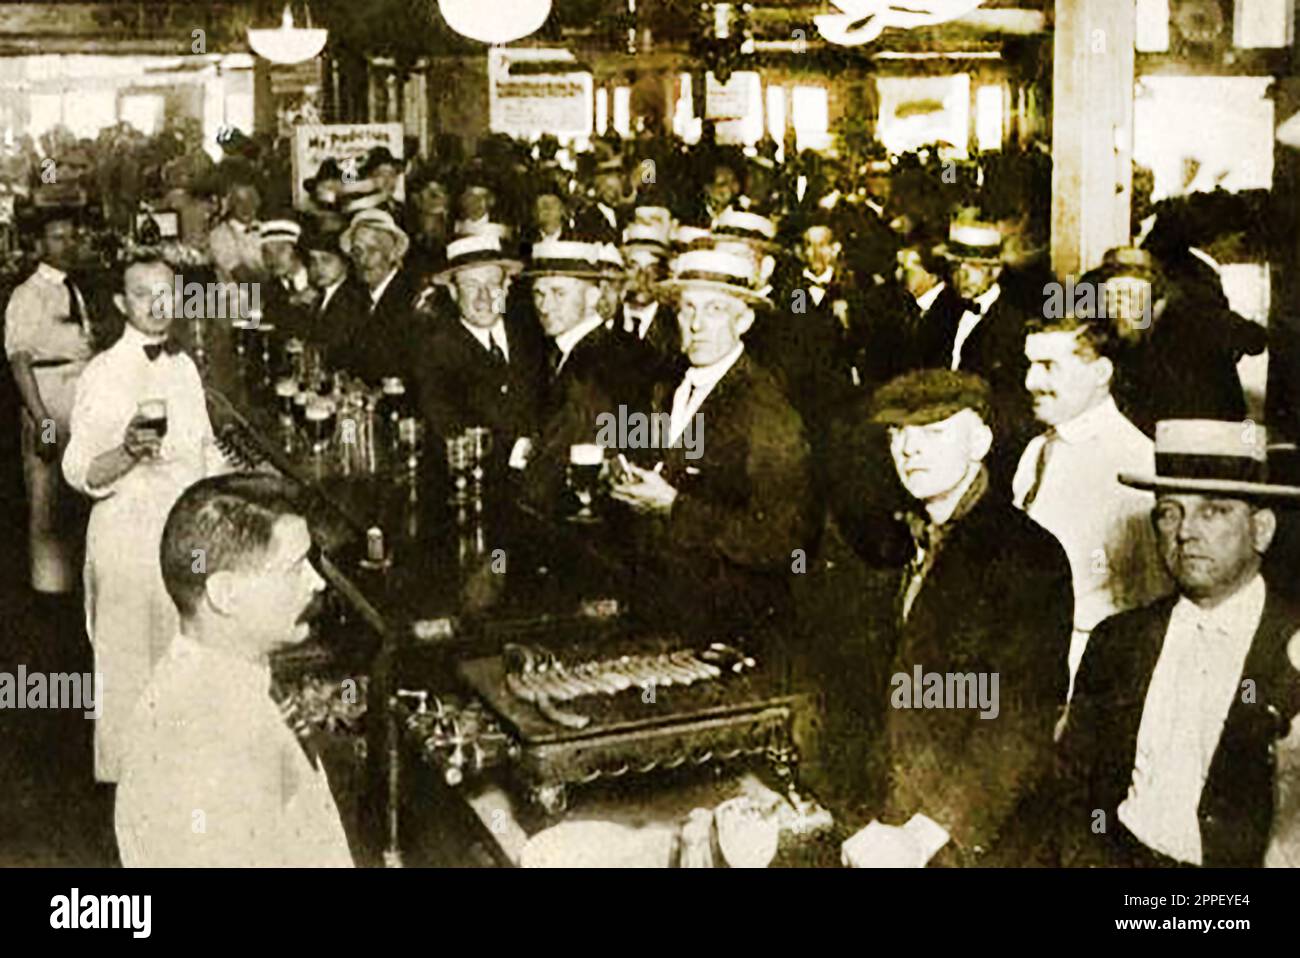 An old press photo showing scene in an American saloon bar just before the imposition of prohibition. Stock Photo